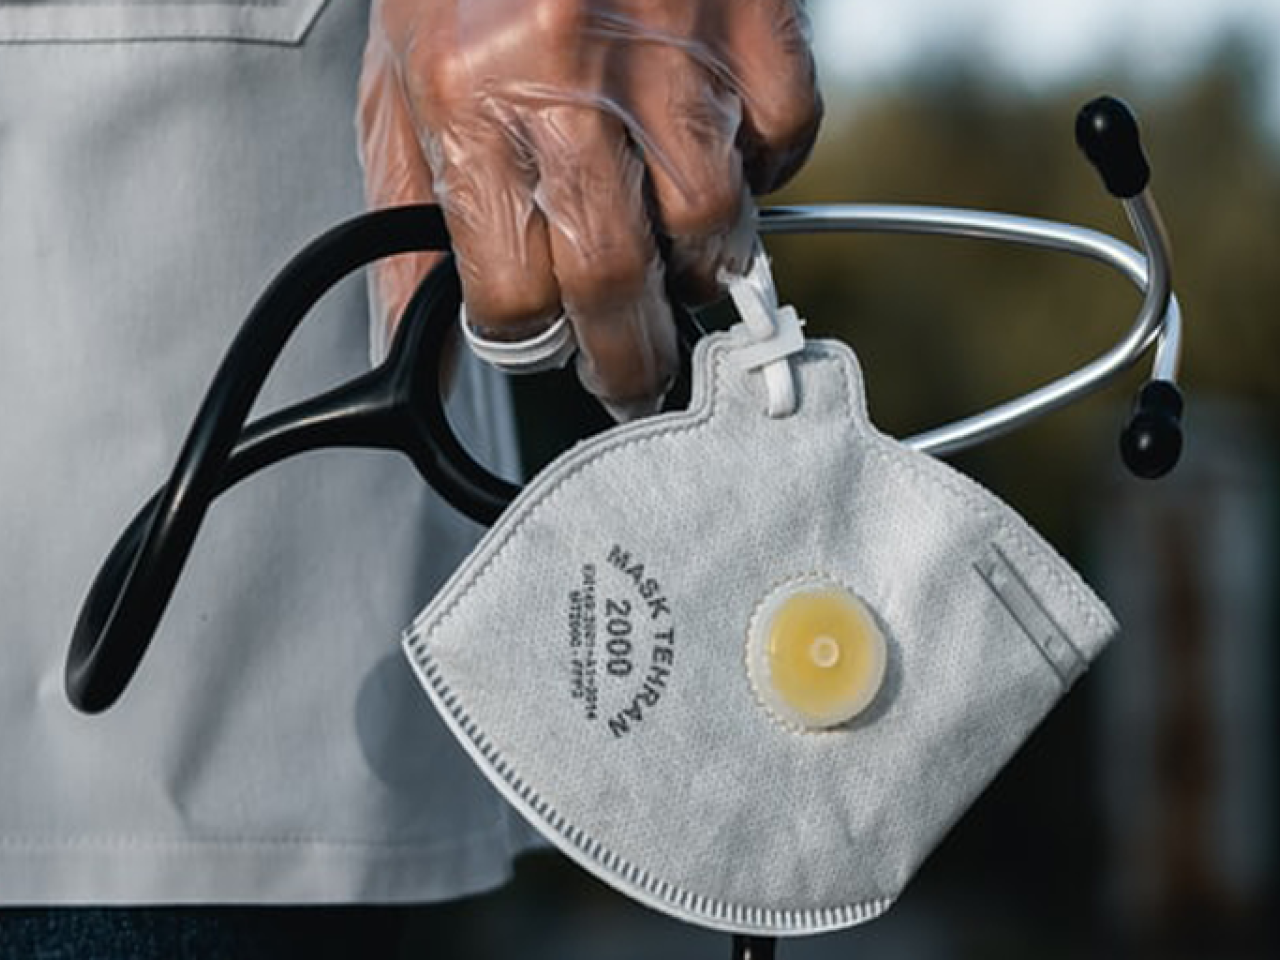 A latex-gloved hand holding a disposable respirator and a stethoscope. The hand is next to the torso of the person's white lab coat.